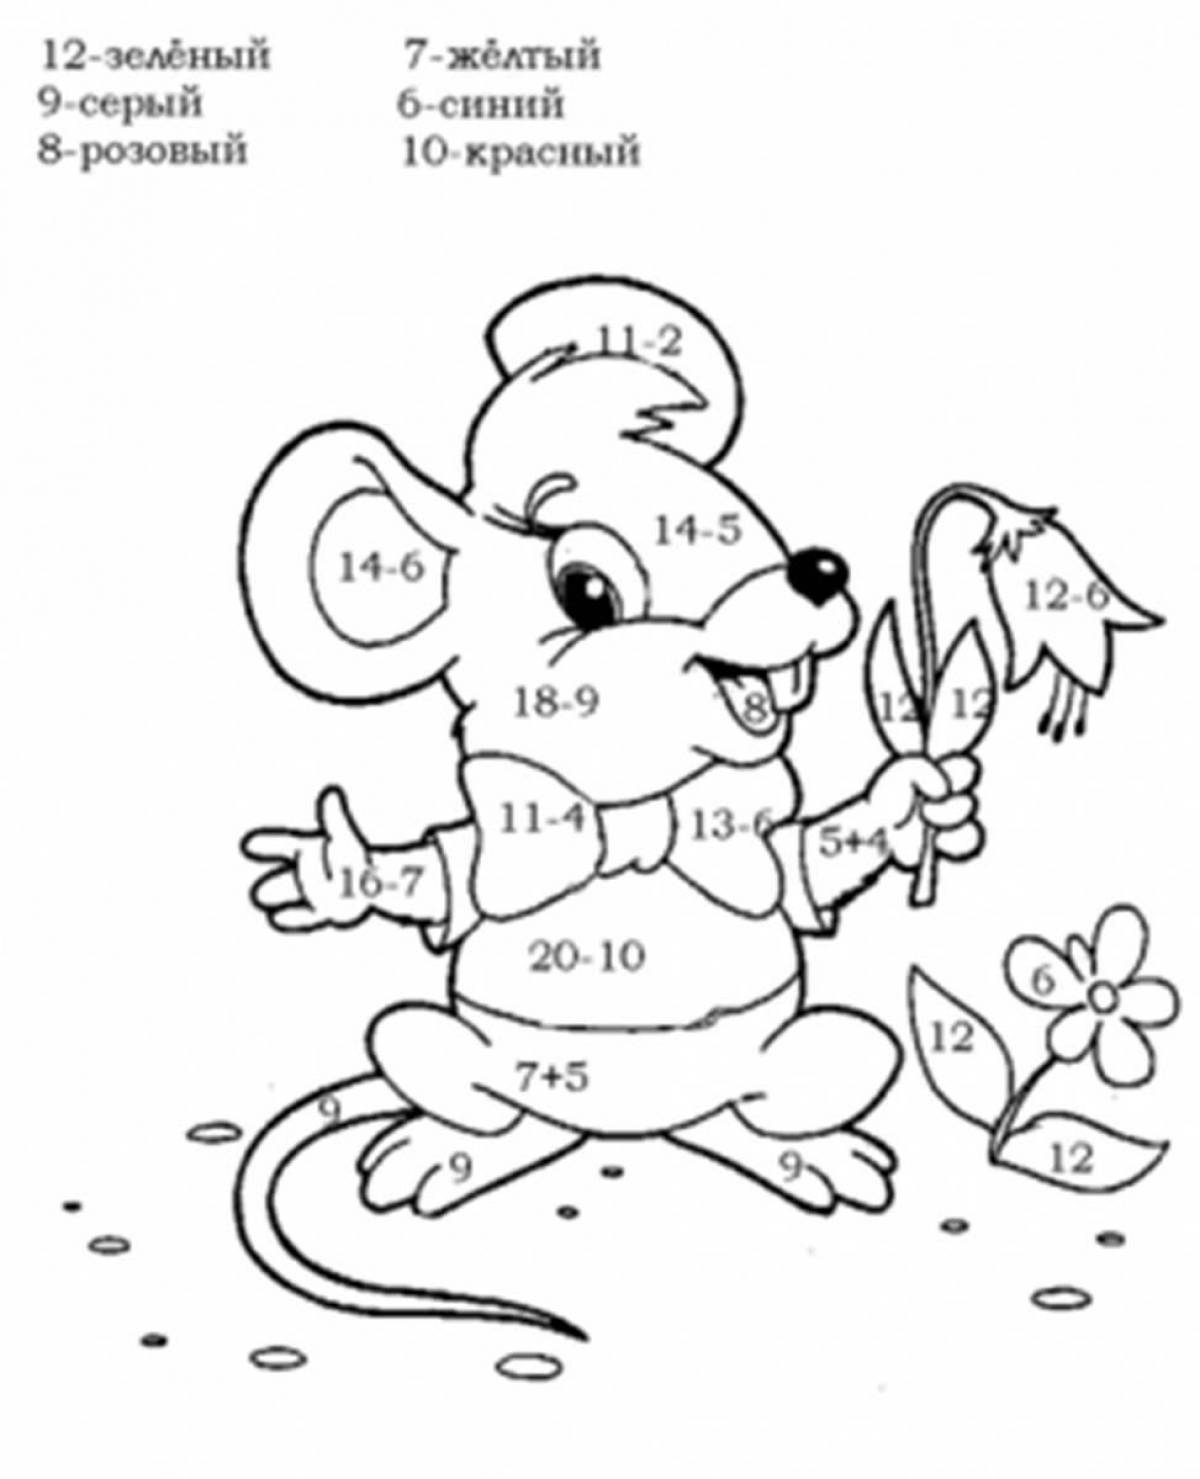 Fun math coloring book for grade 1 with examples up to 20